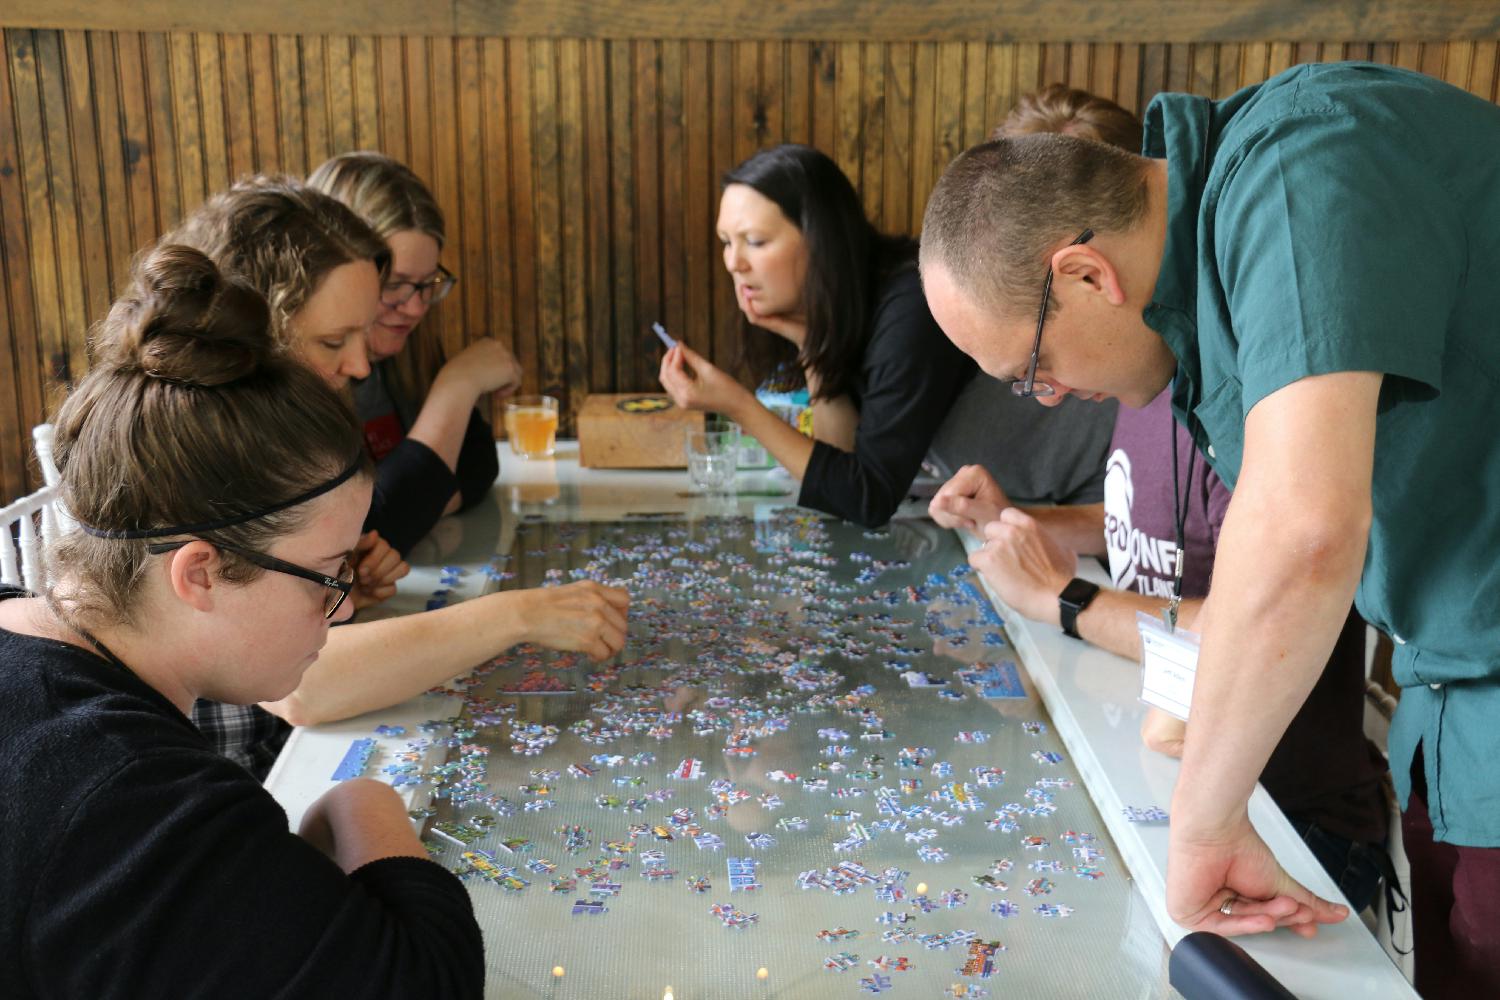 Our analytical team loves puzzles!